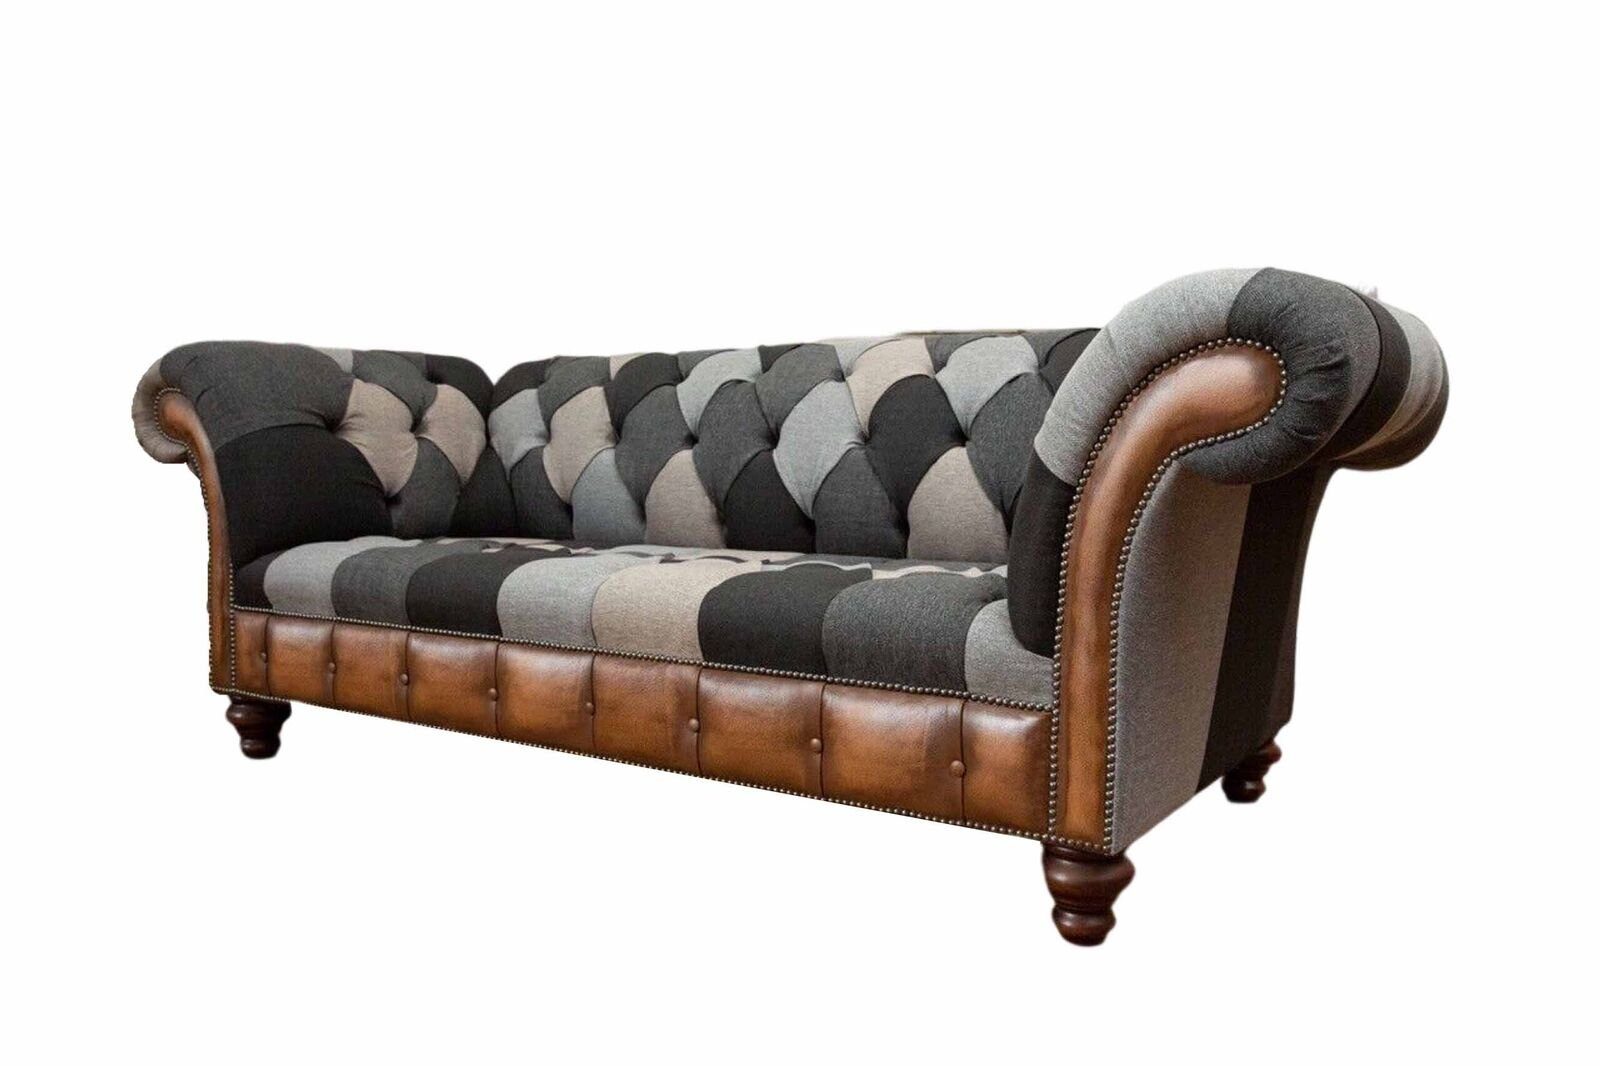 JVmoebel Sofa Bunter Chesterfield 3 Sitzer Couch Polster Textil Couchen, Made In Europe